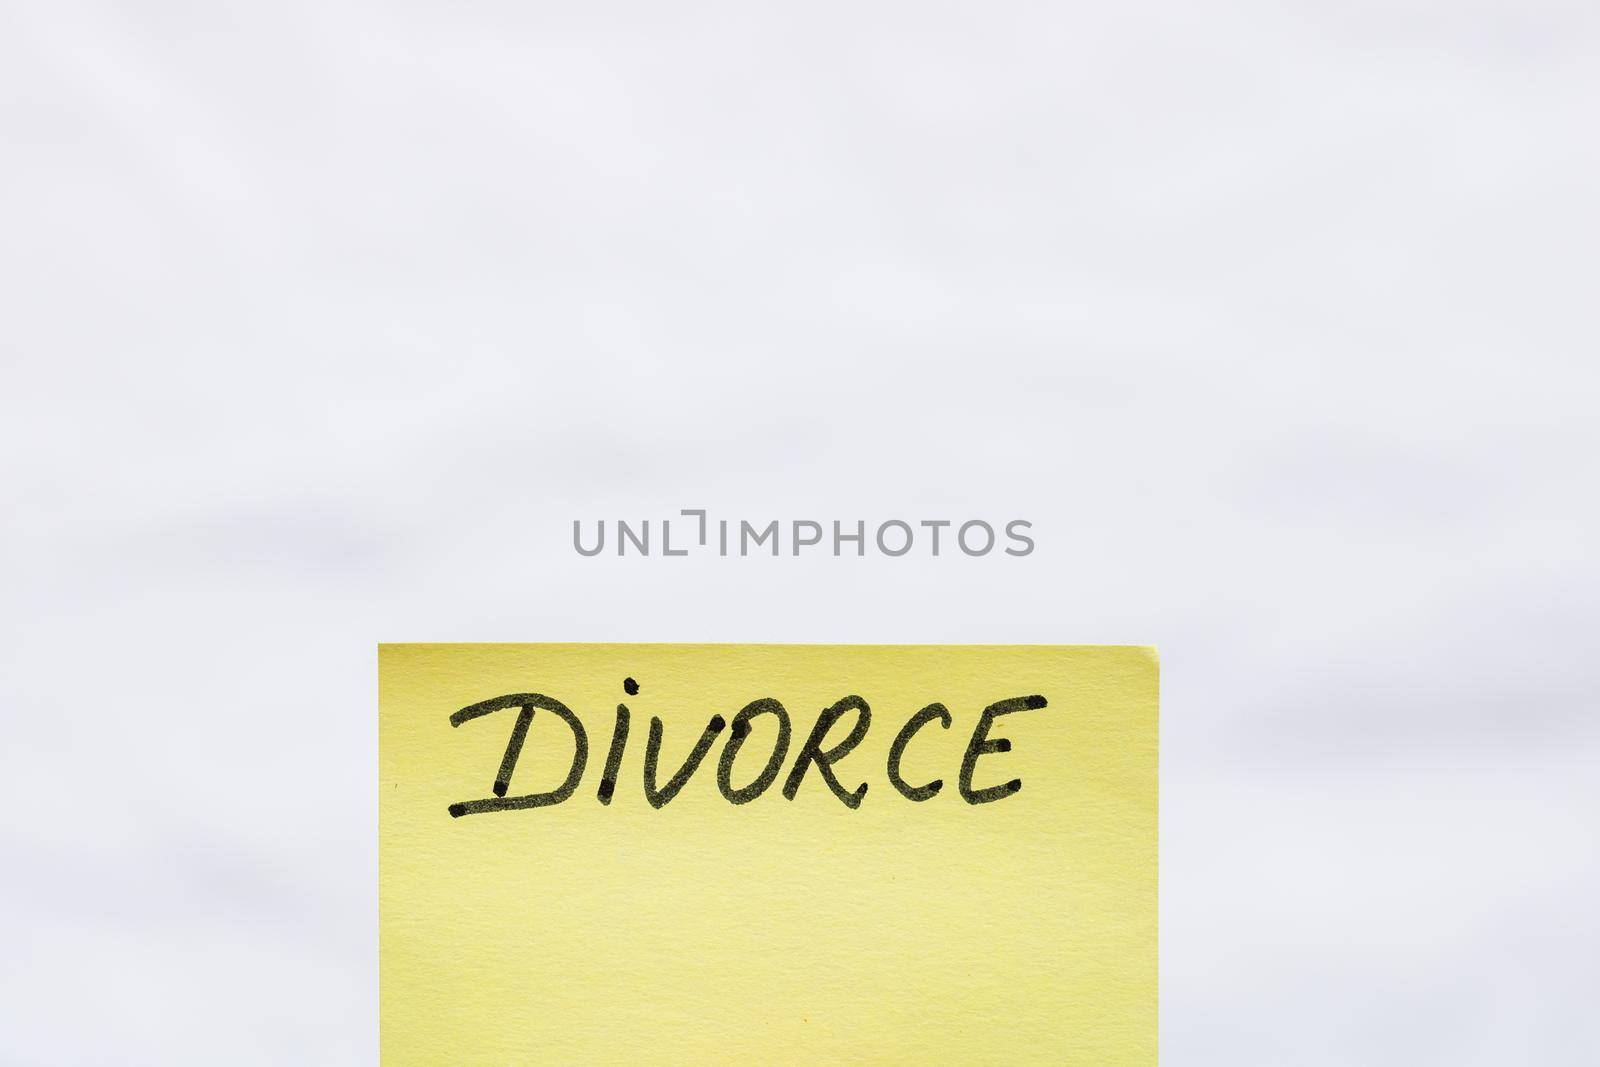 Divorce handwriting text close up isolated on yellow paper with copy space.